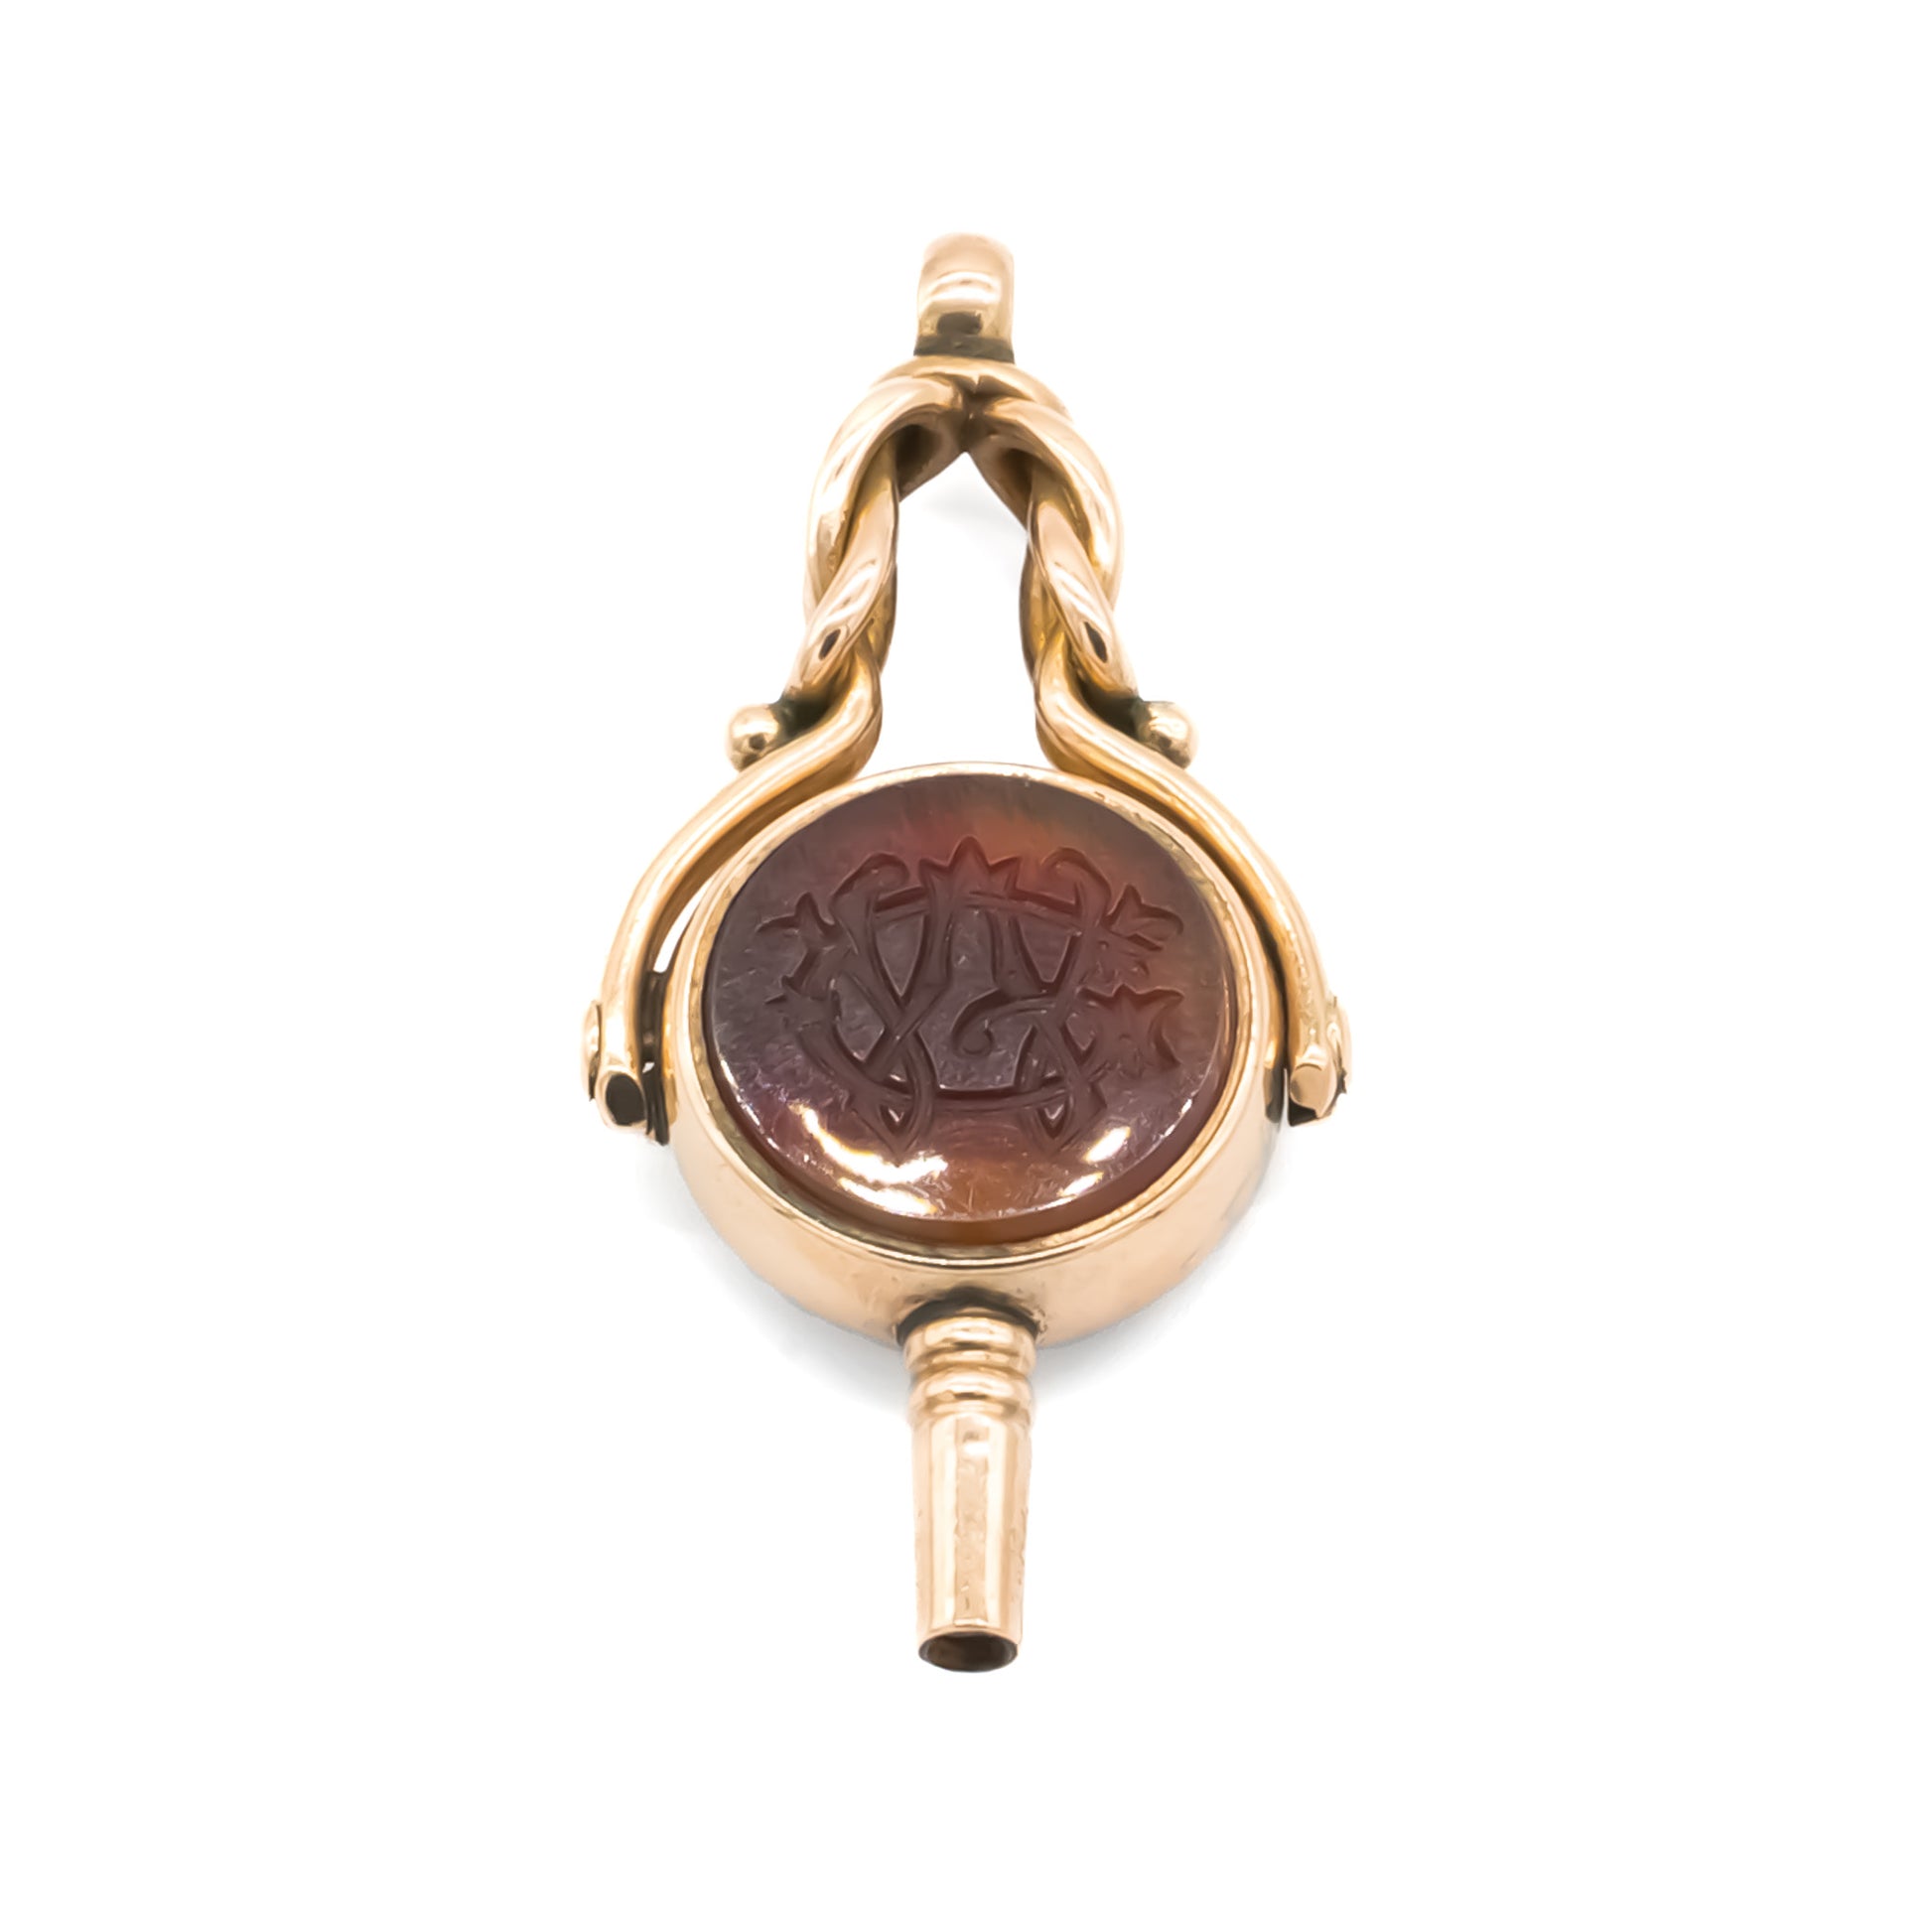 Classic Victorian 9ct rose gold swivel seal/watch key set with a carnelian intaglio and sardonyx.